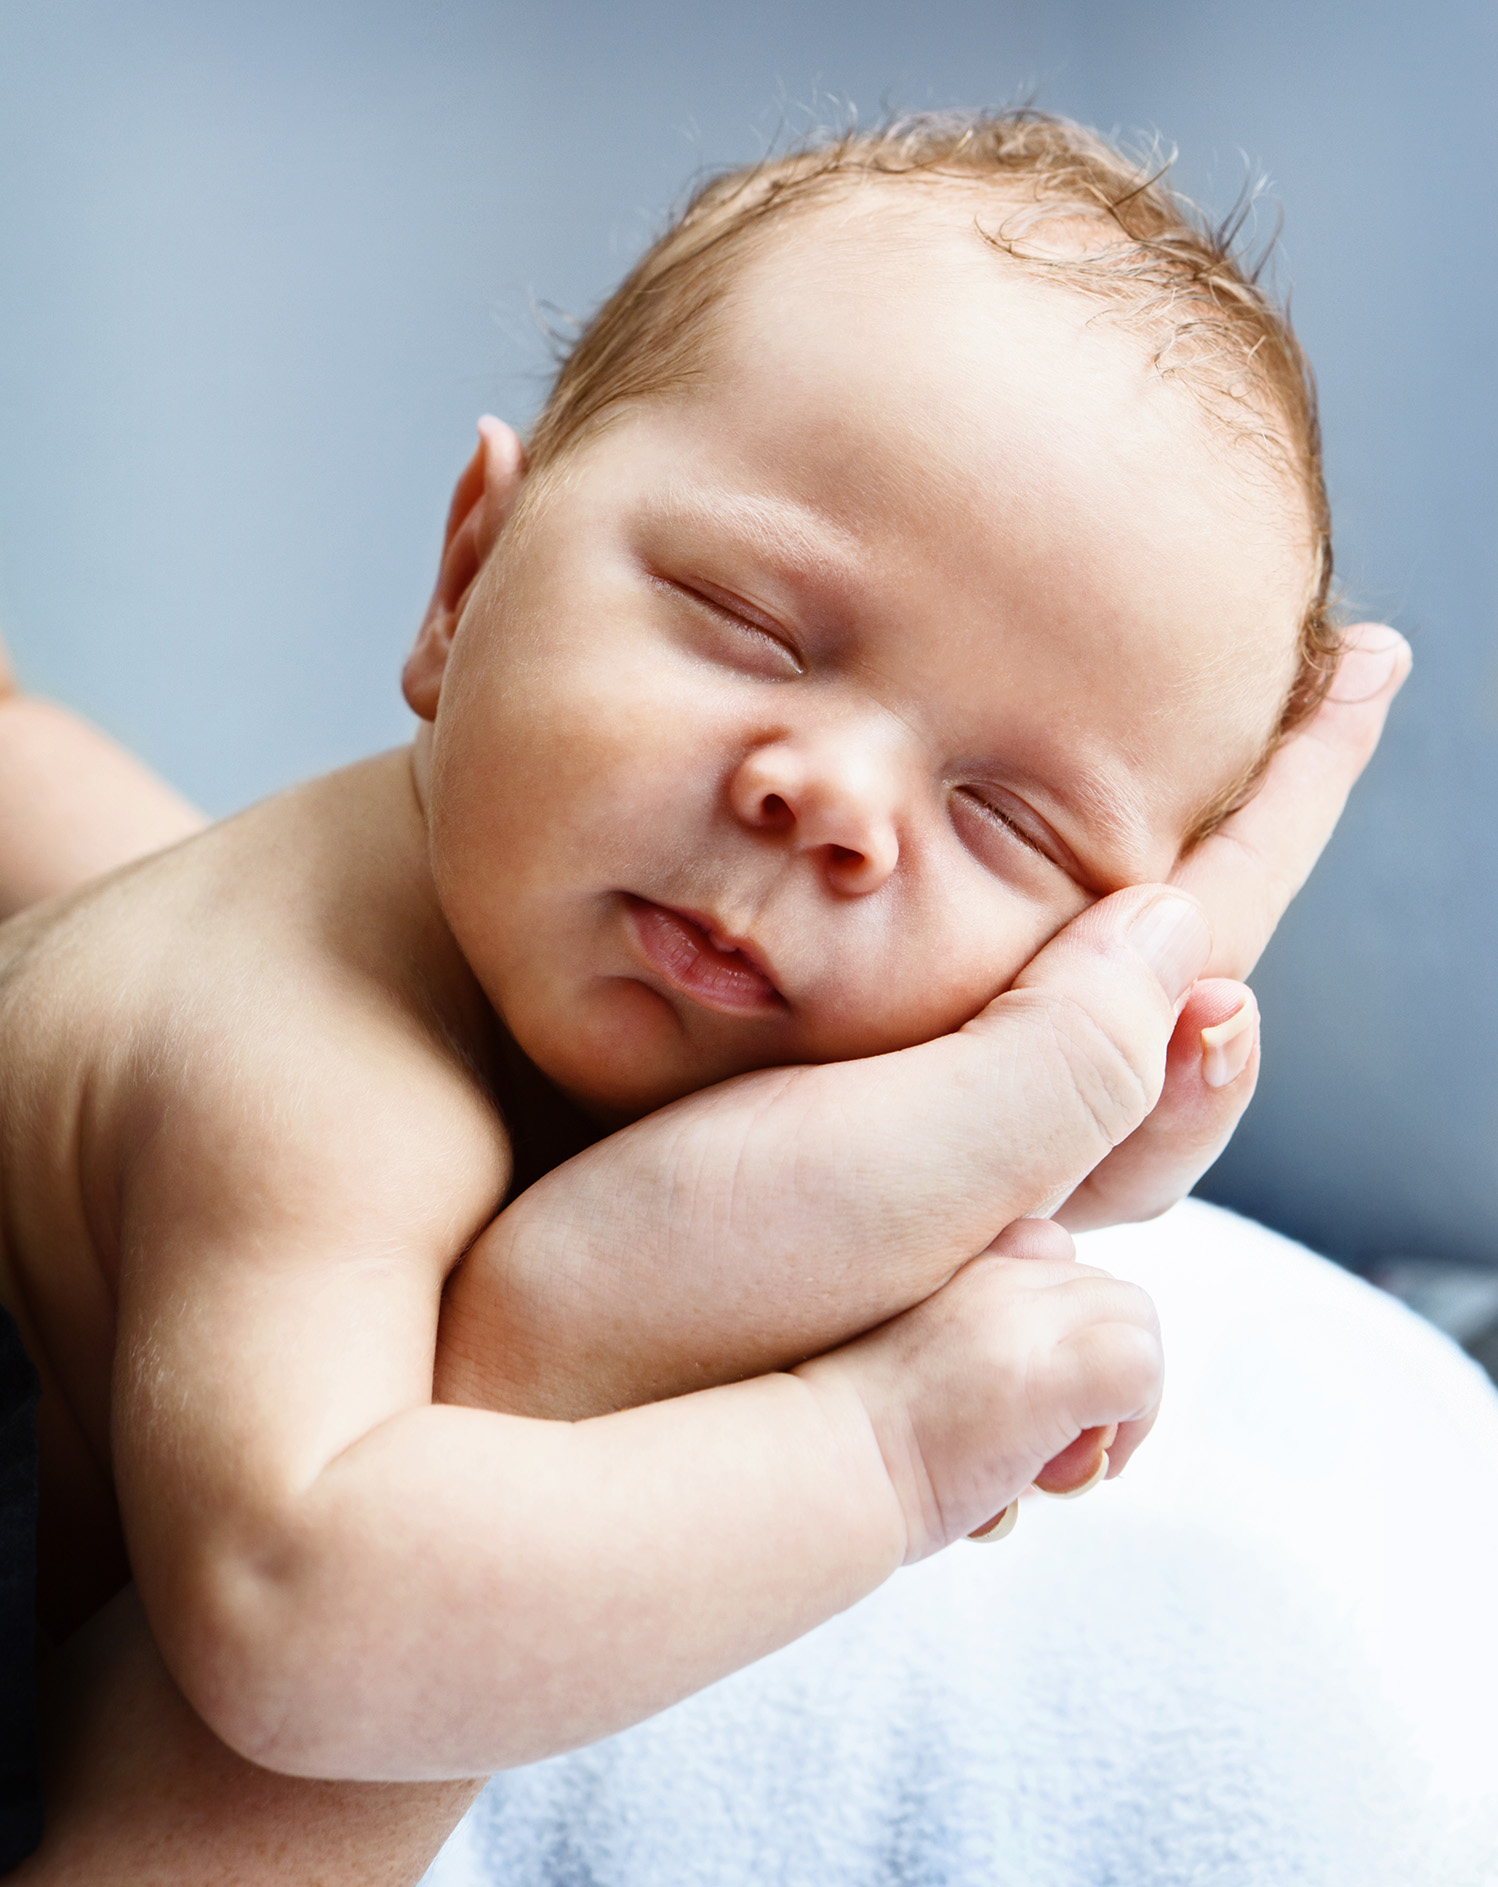 Blissfully sleeping baby cradled in mothers hands stock photo